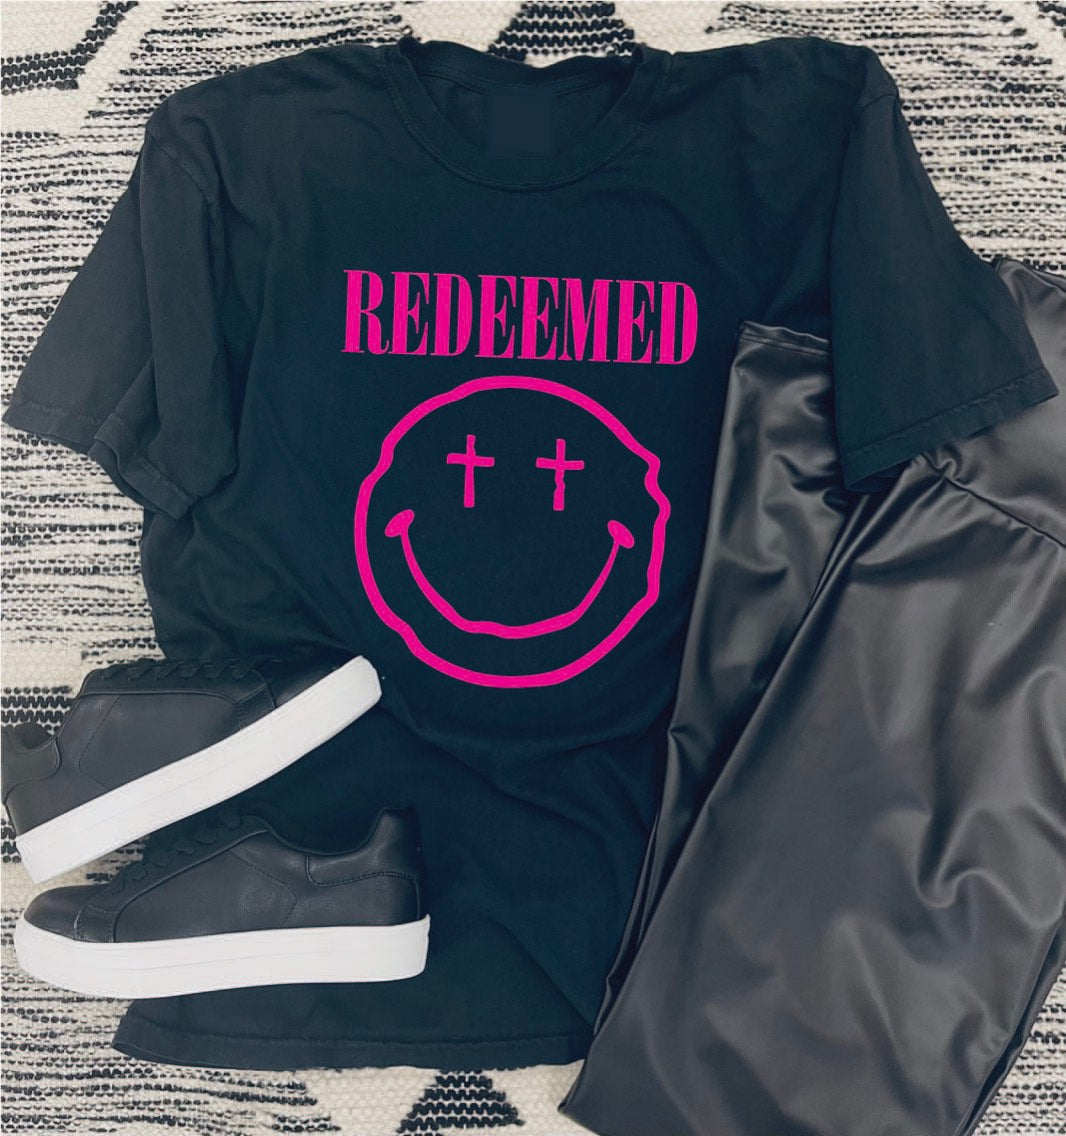 This style is a black unisex tee with a crew neckline. It has a bright neon pink graphic. The graphic features a smiley face with crosses for the eyes. Below, it states REDEEMED in bold lettering. 